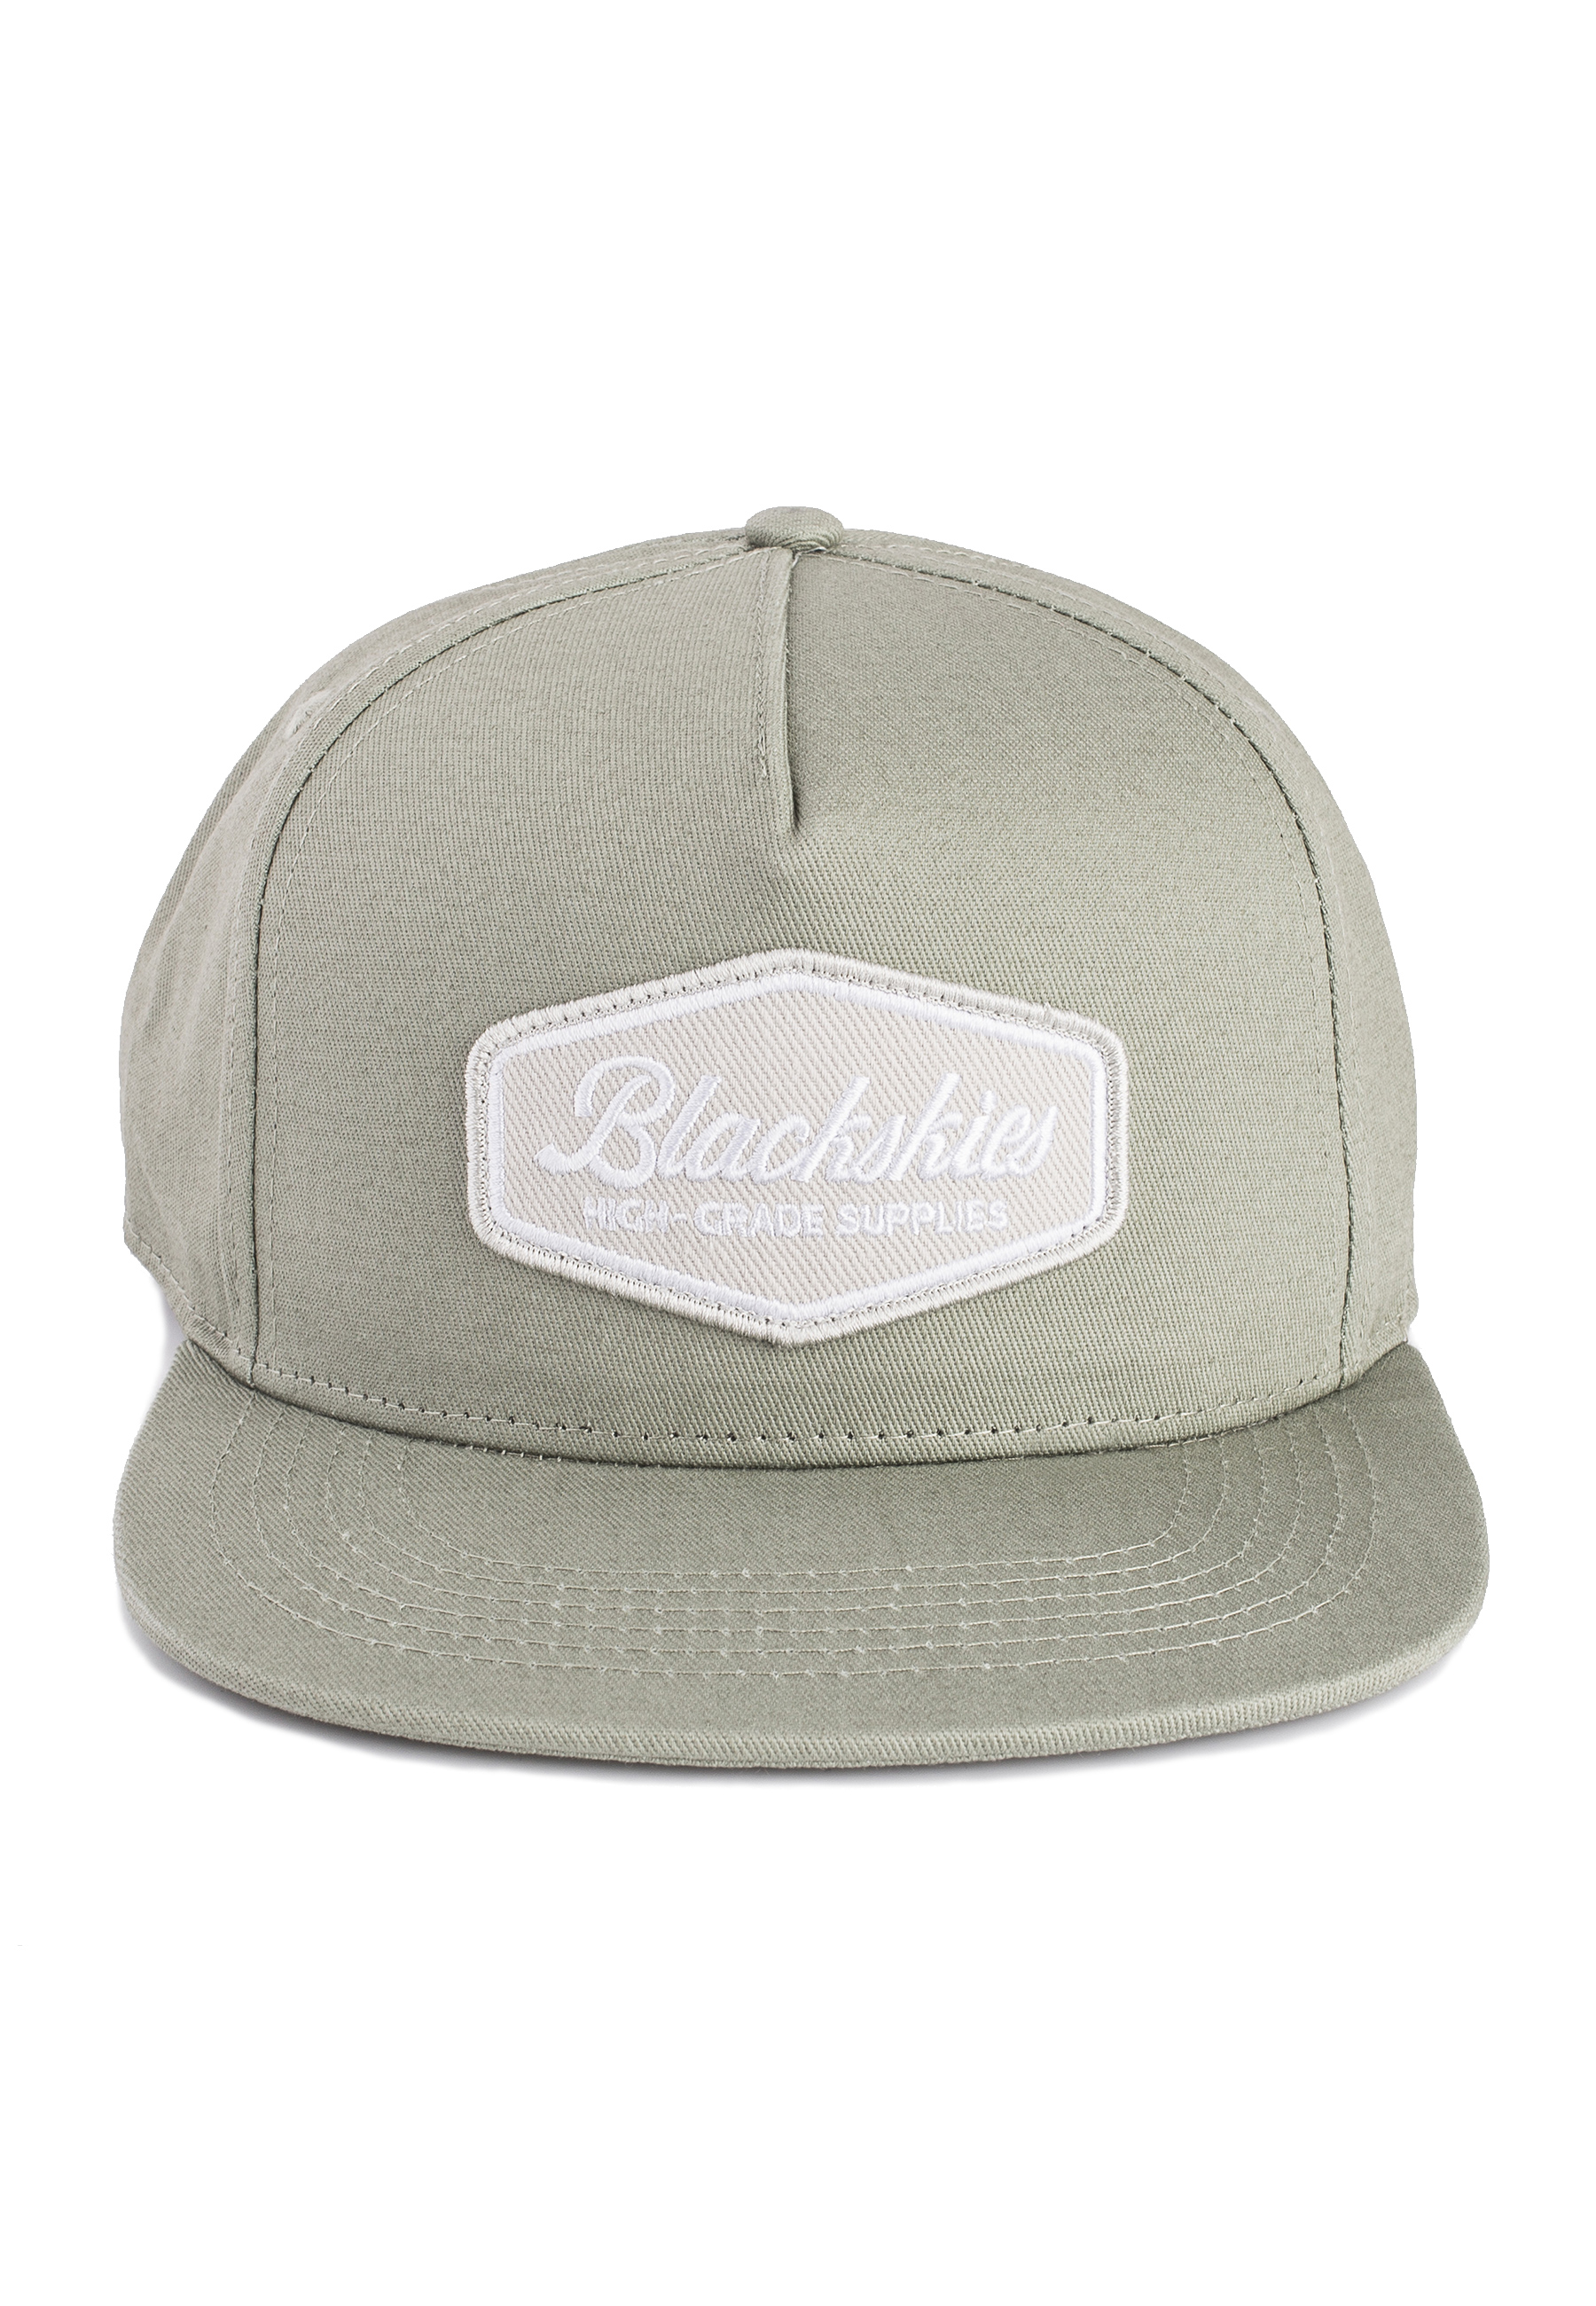 Details about   New Rugged Lacrosse Gray Green Hat Cap SnapBack $30 